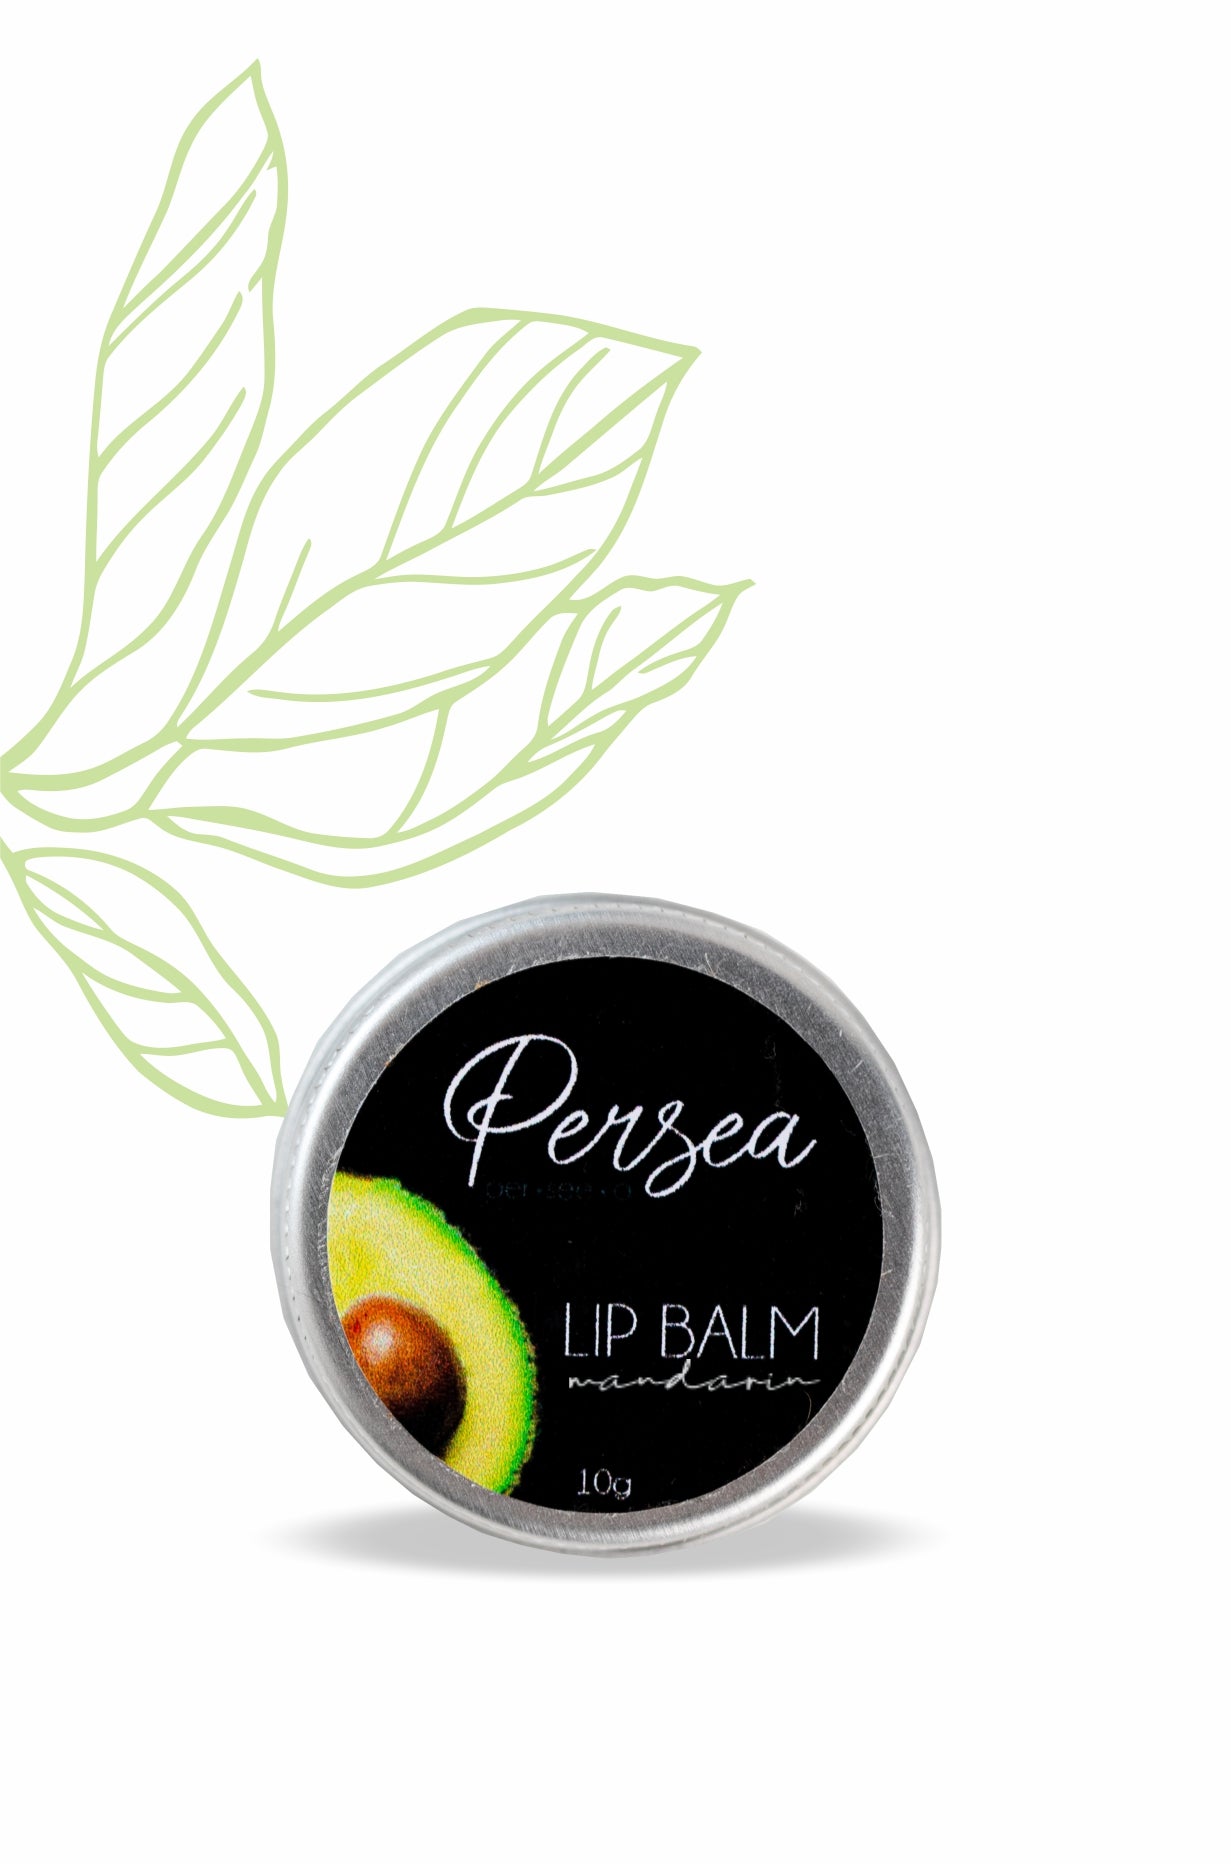 Persea Avo Lip Balm. Moisturises your lips for hours! Mandarin Scented. All natural!